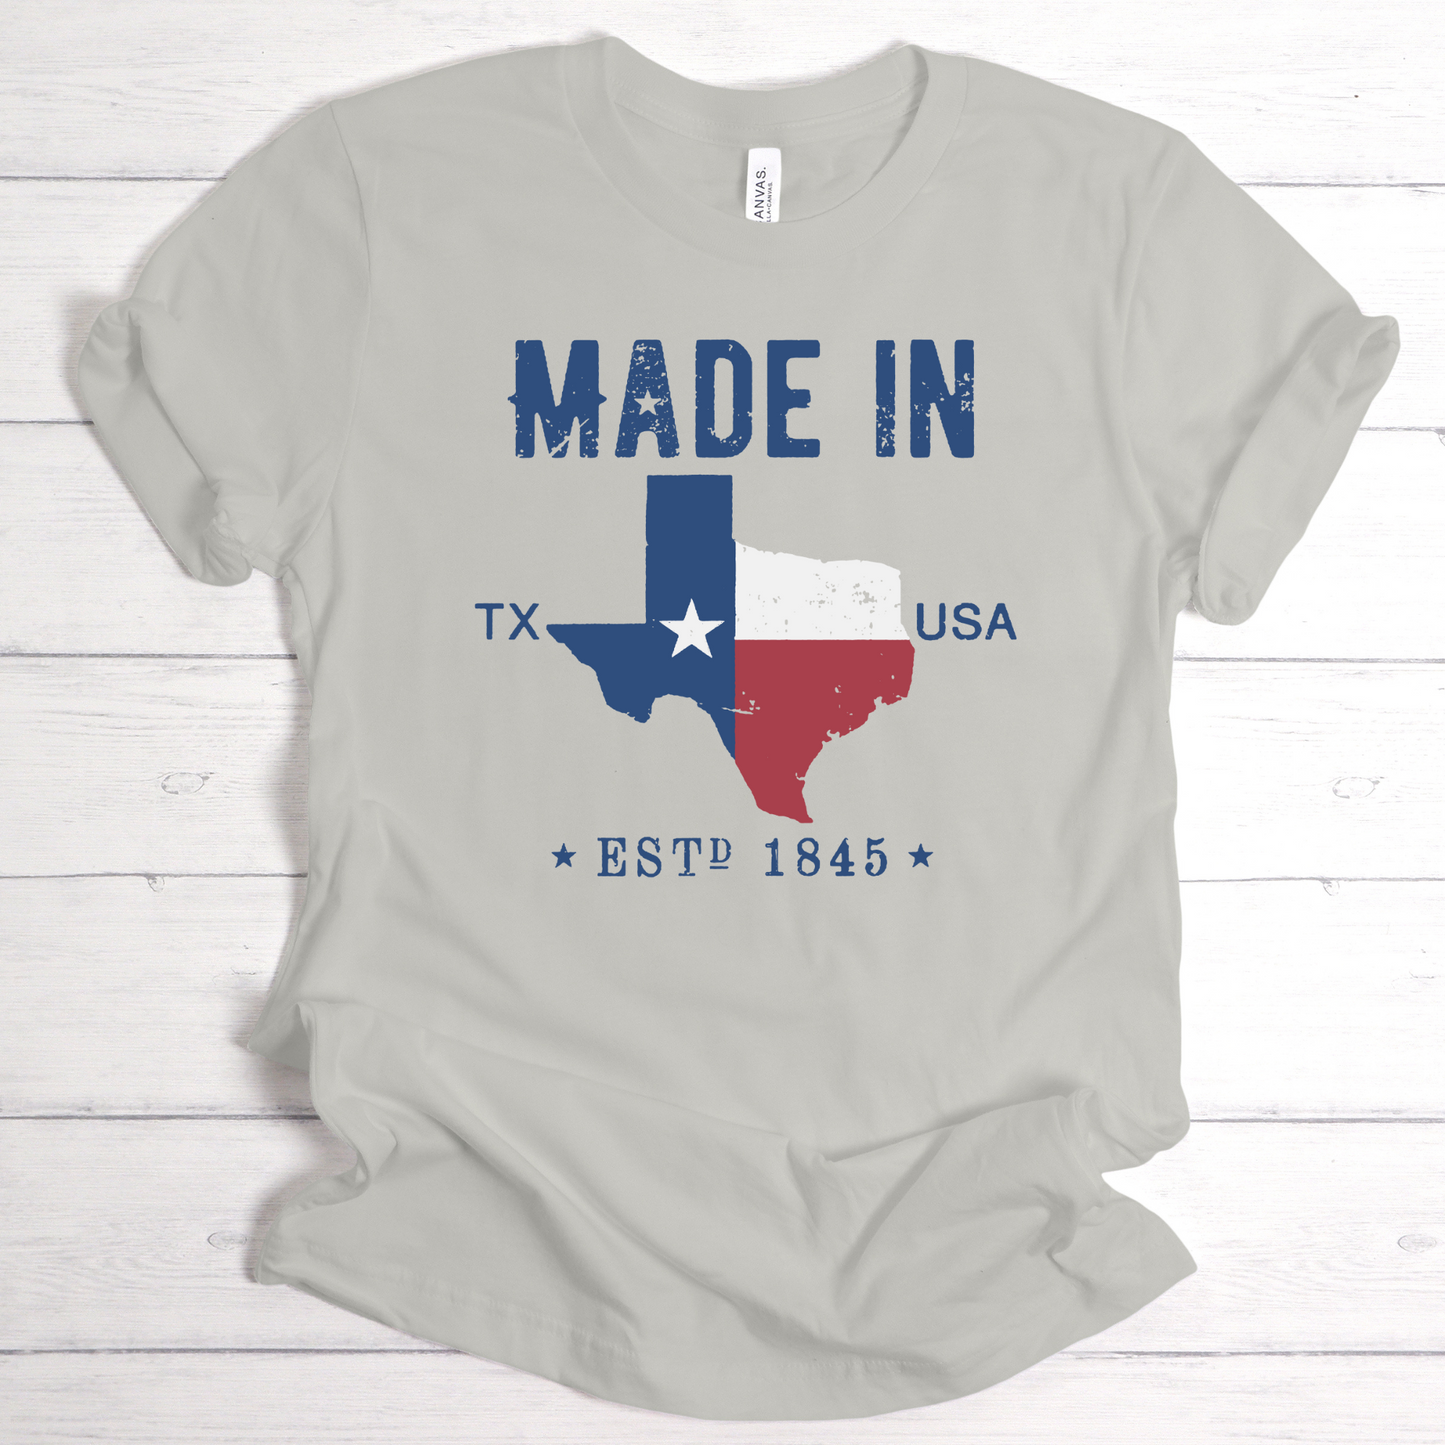 Texas Lone Star State T-Shirt | Stylish Texan Apparel for Every Proud Texan